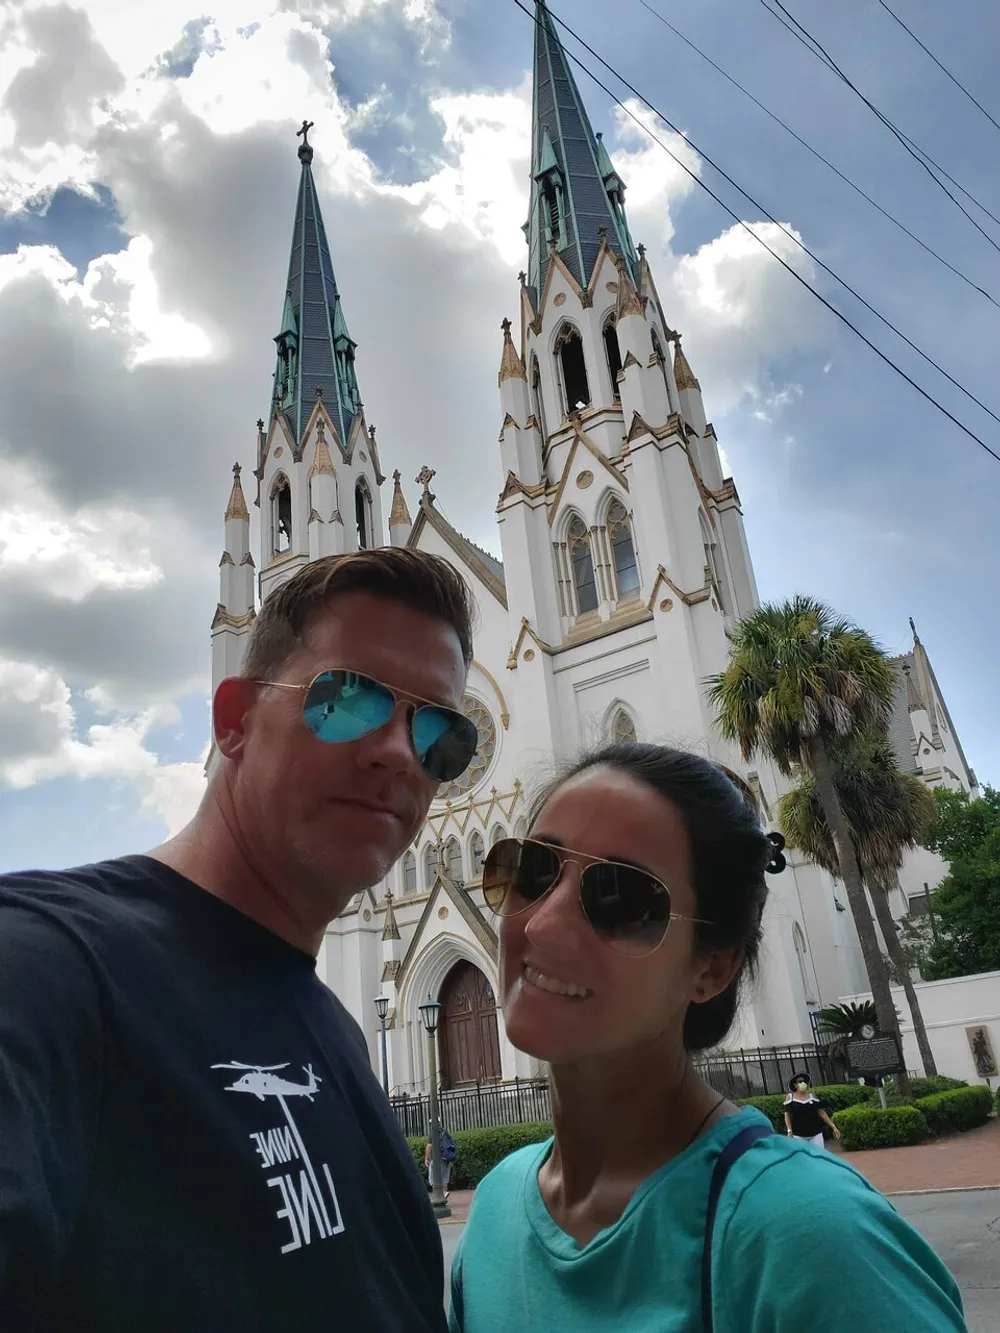 A man and a woman are taking a selfie with an ornate church featuring twin spires and Gothic architecture in the background